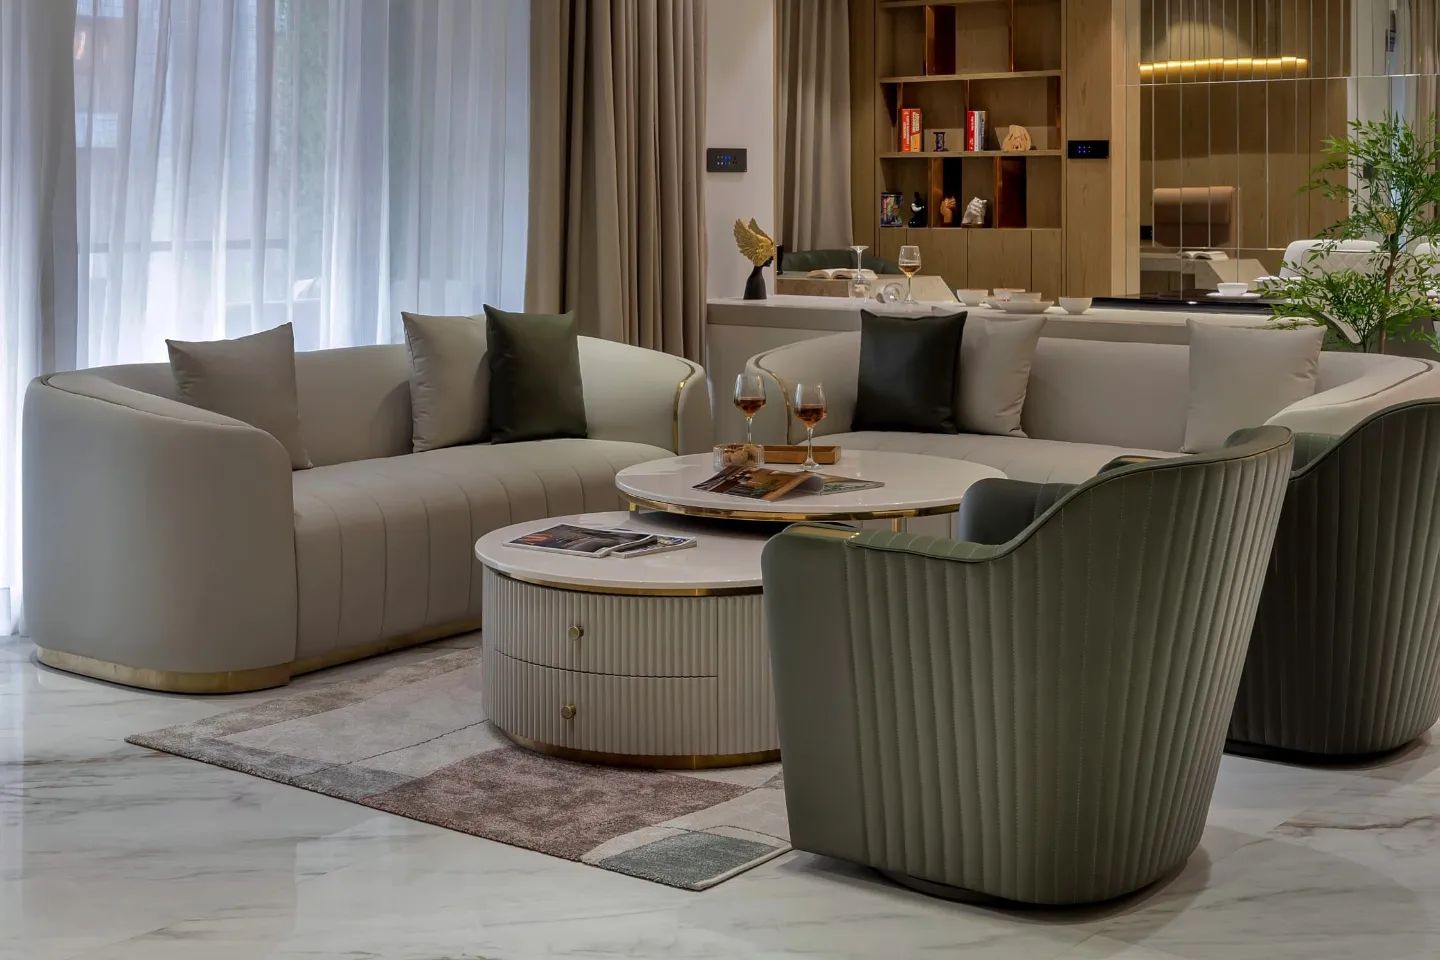 Choose The Right Luxury Furniture For Your Luxury Apartment